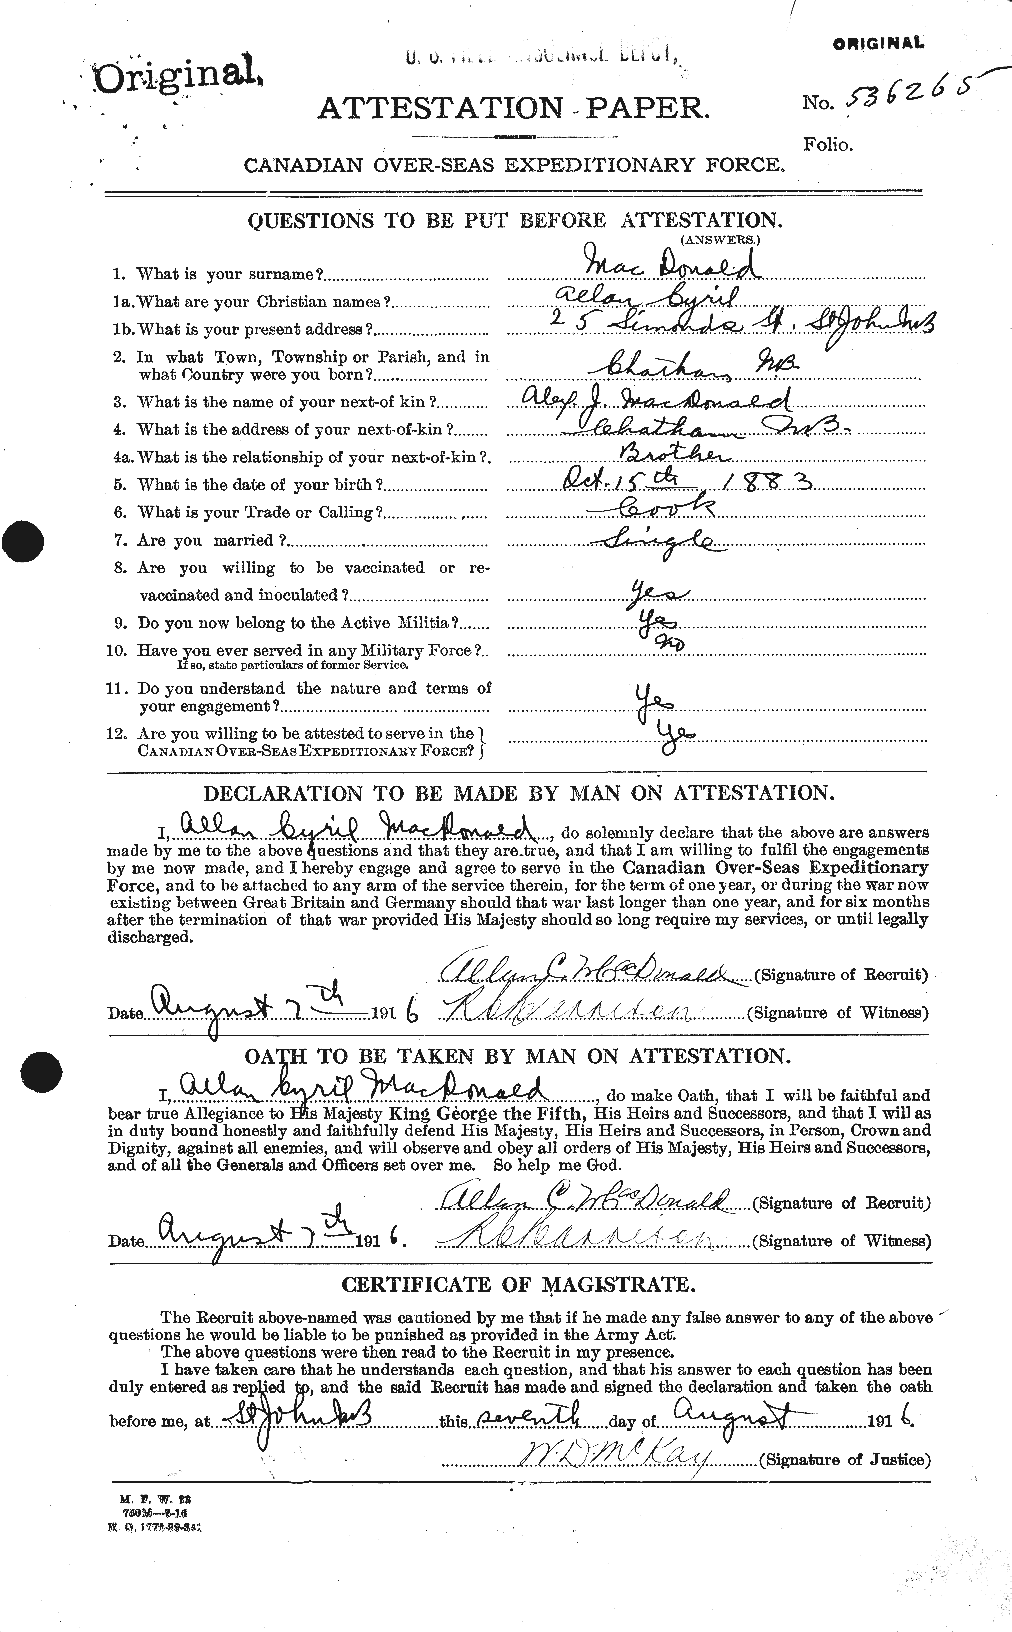 Personnel Records of the First World War - CEF 520333a